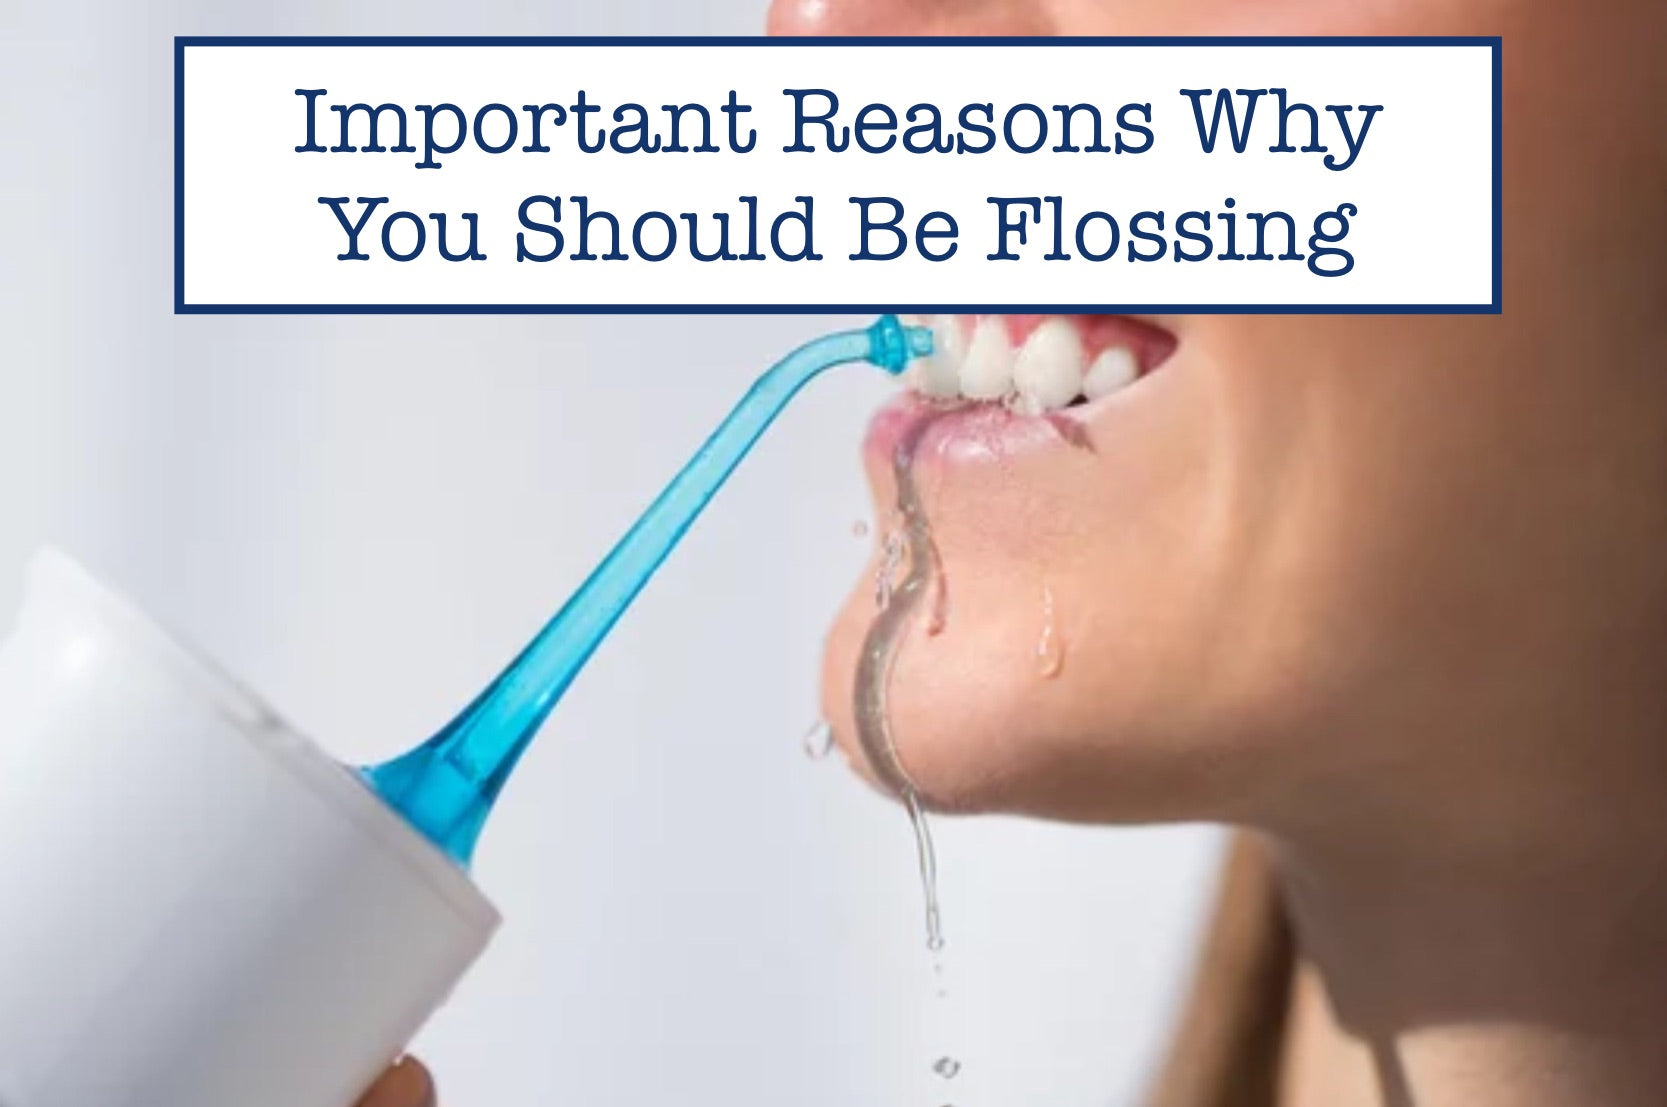 Important Reasons Why You Should Be Flossing